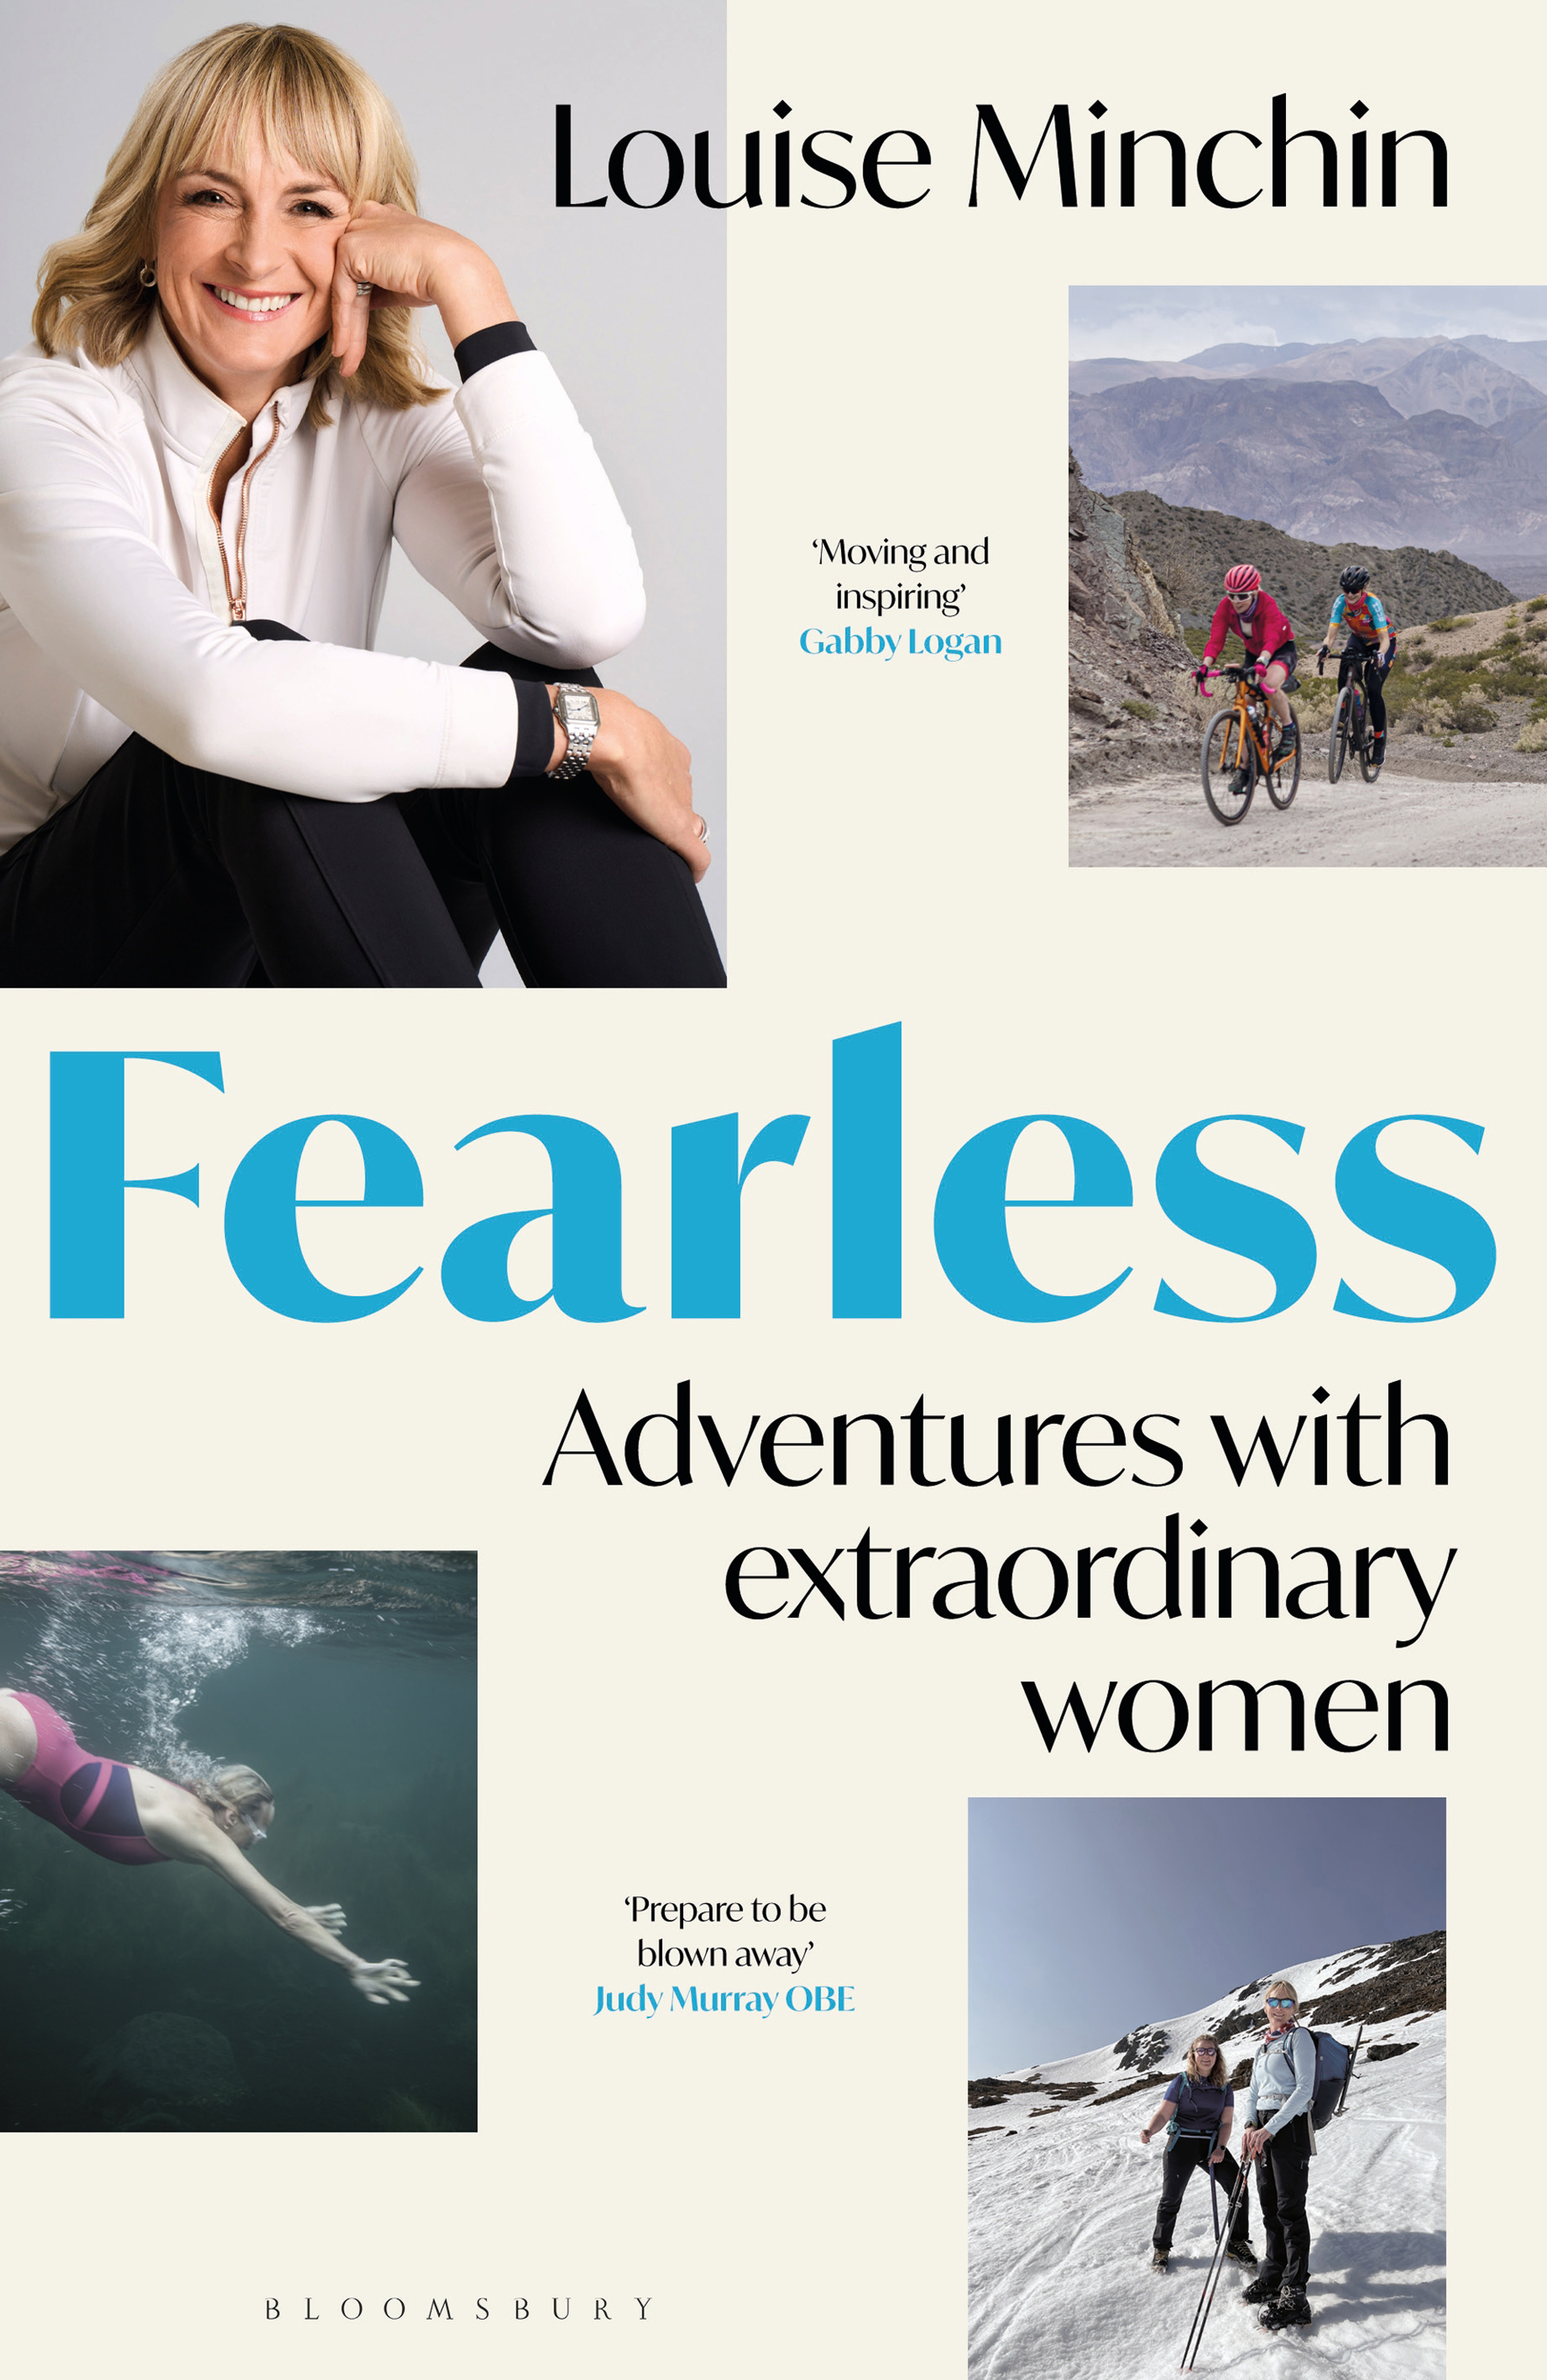 Fearless by Louise Minchin is out now.